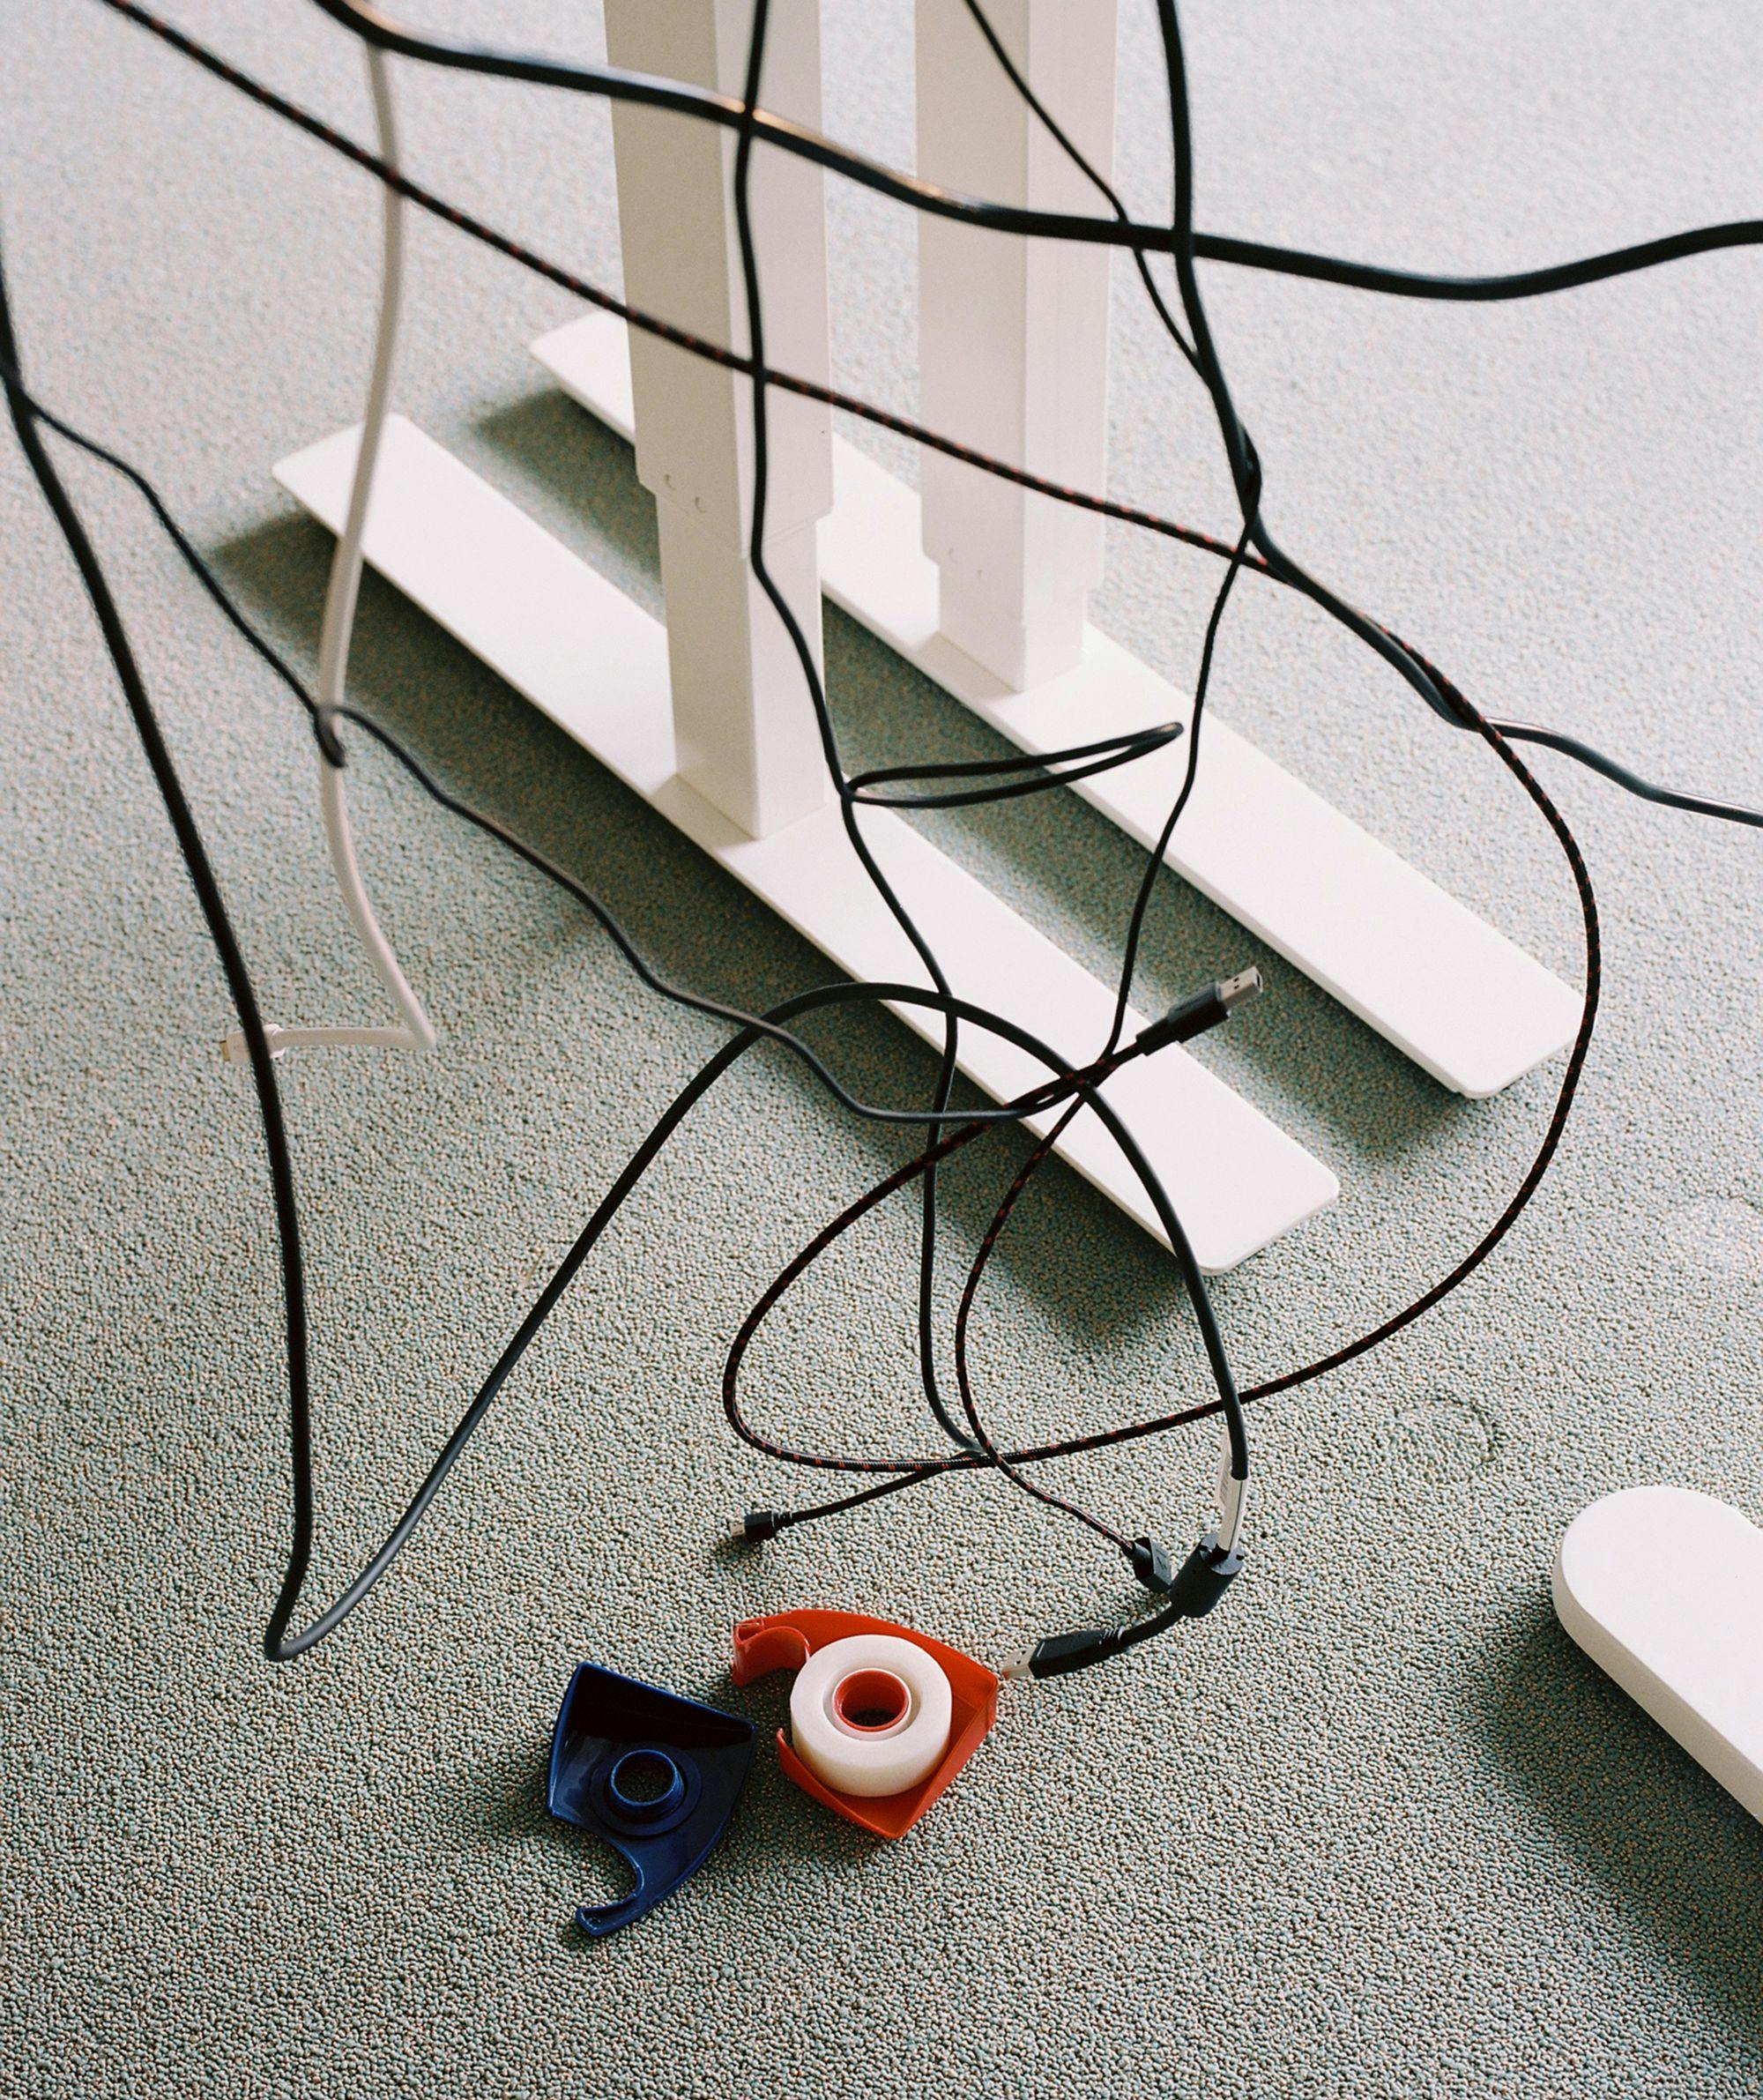 Computer cables and tape dispenser